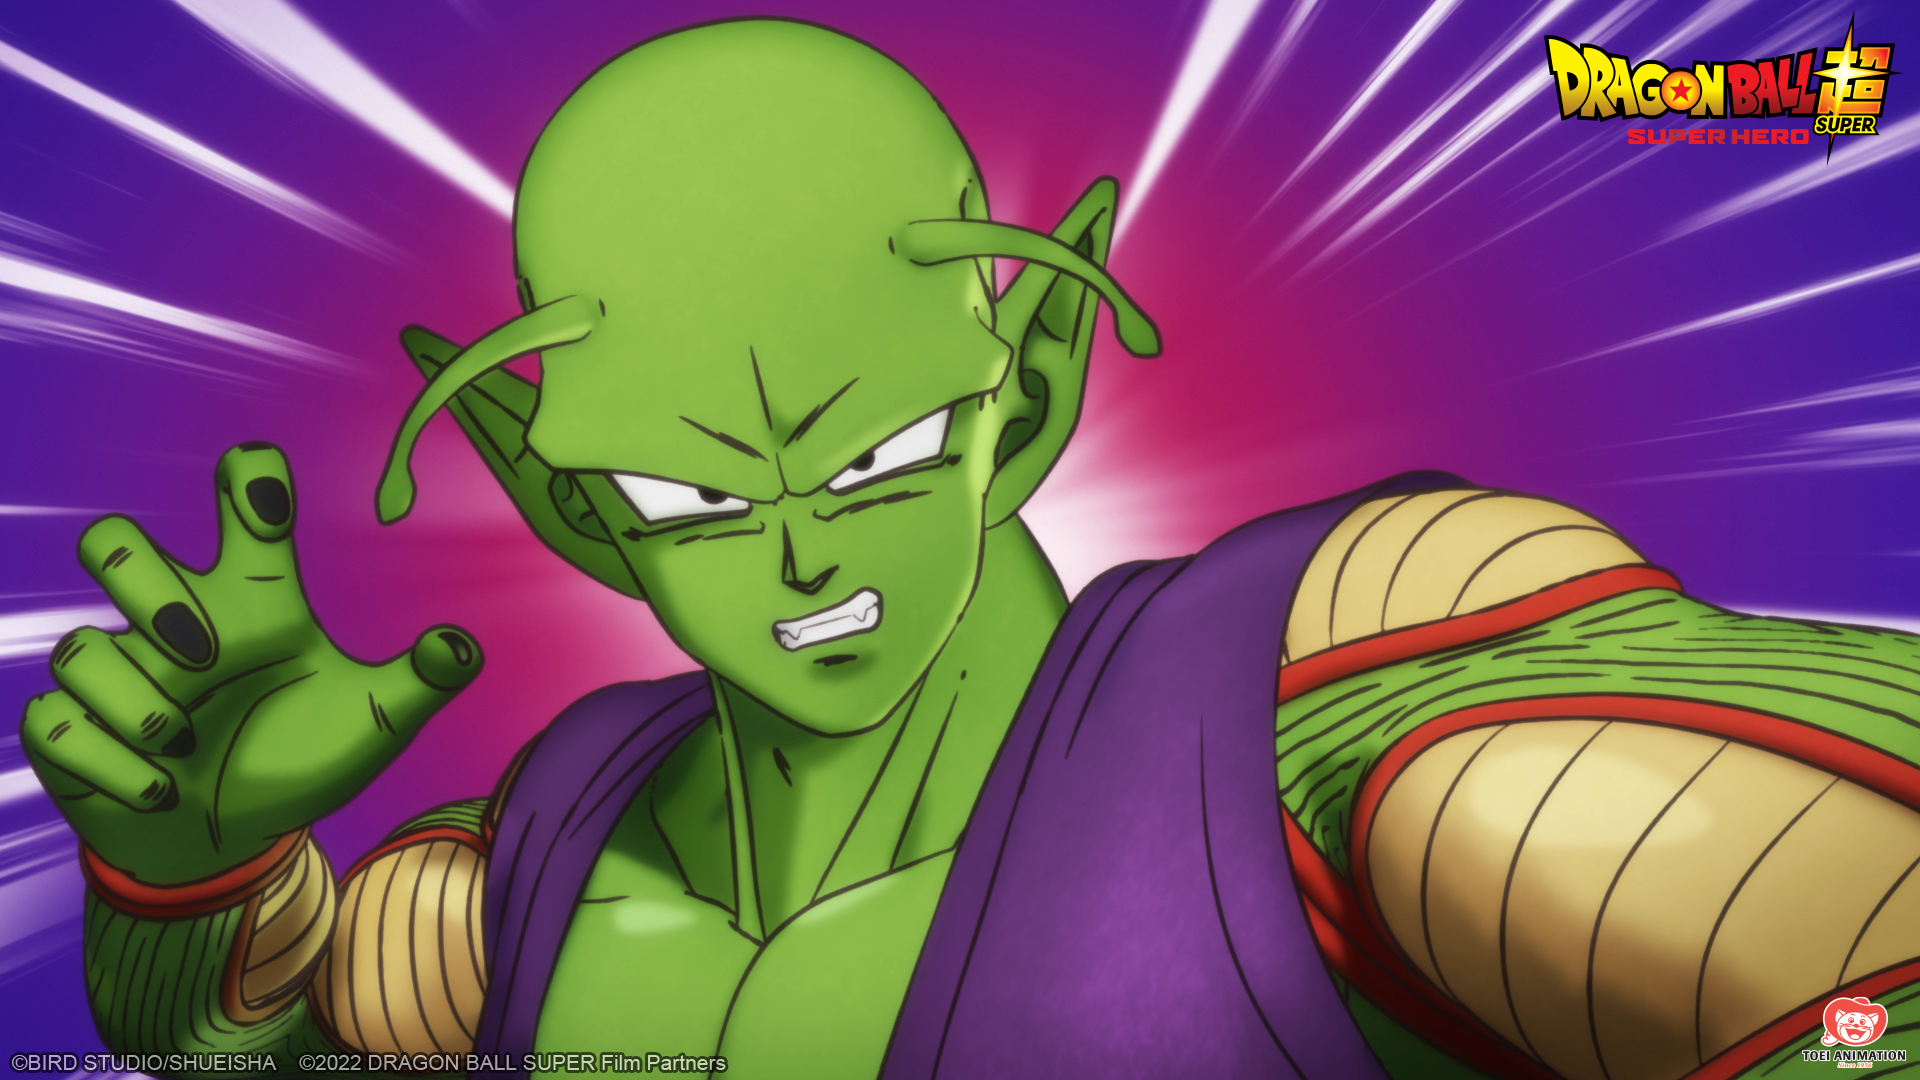 'Dragon Ball Super: Super Hero' features Piccolo striking heroic poses while carrying the plot forward.